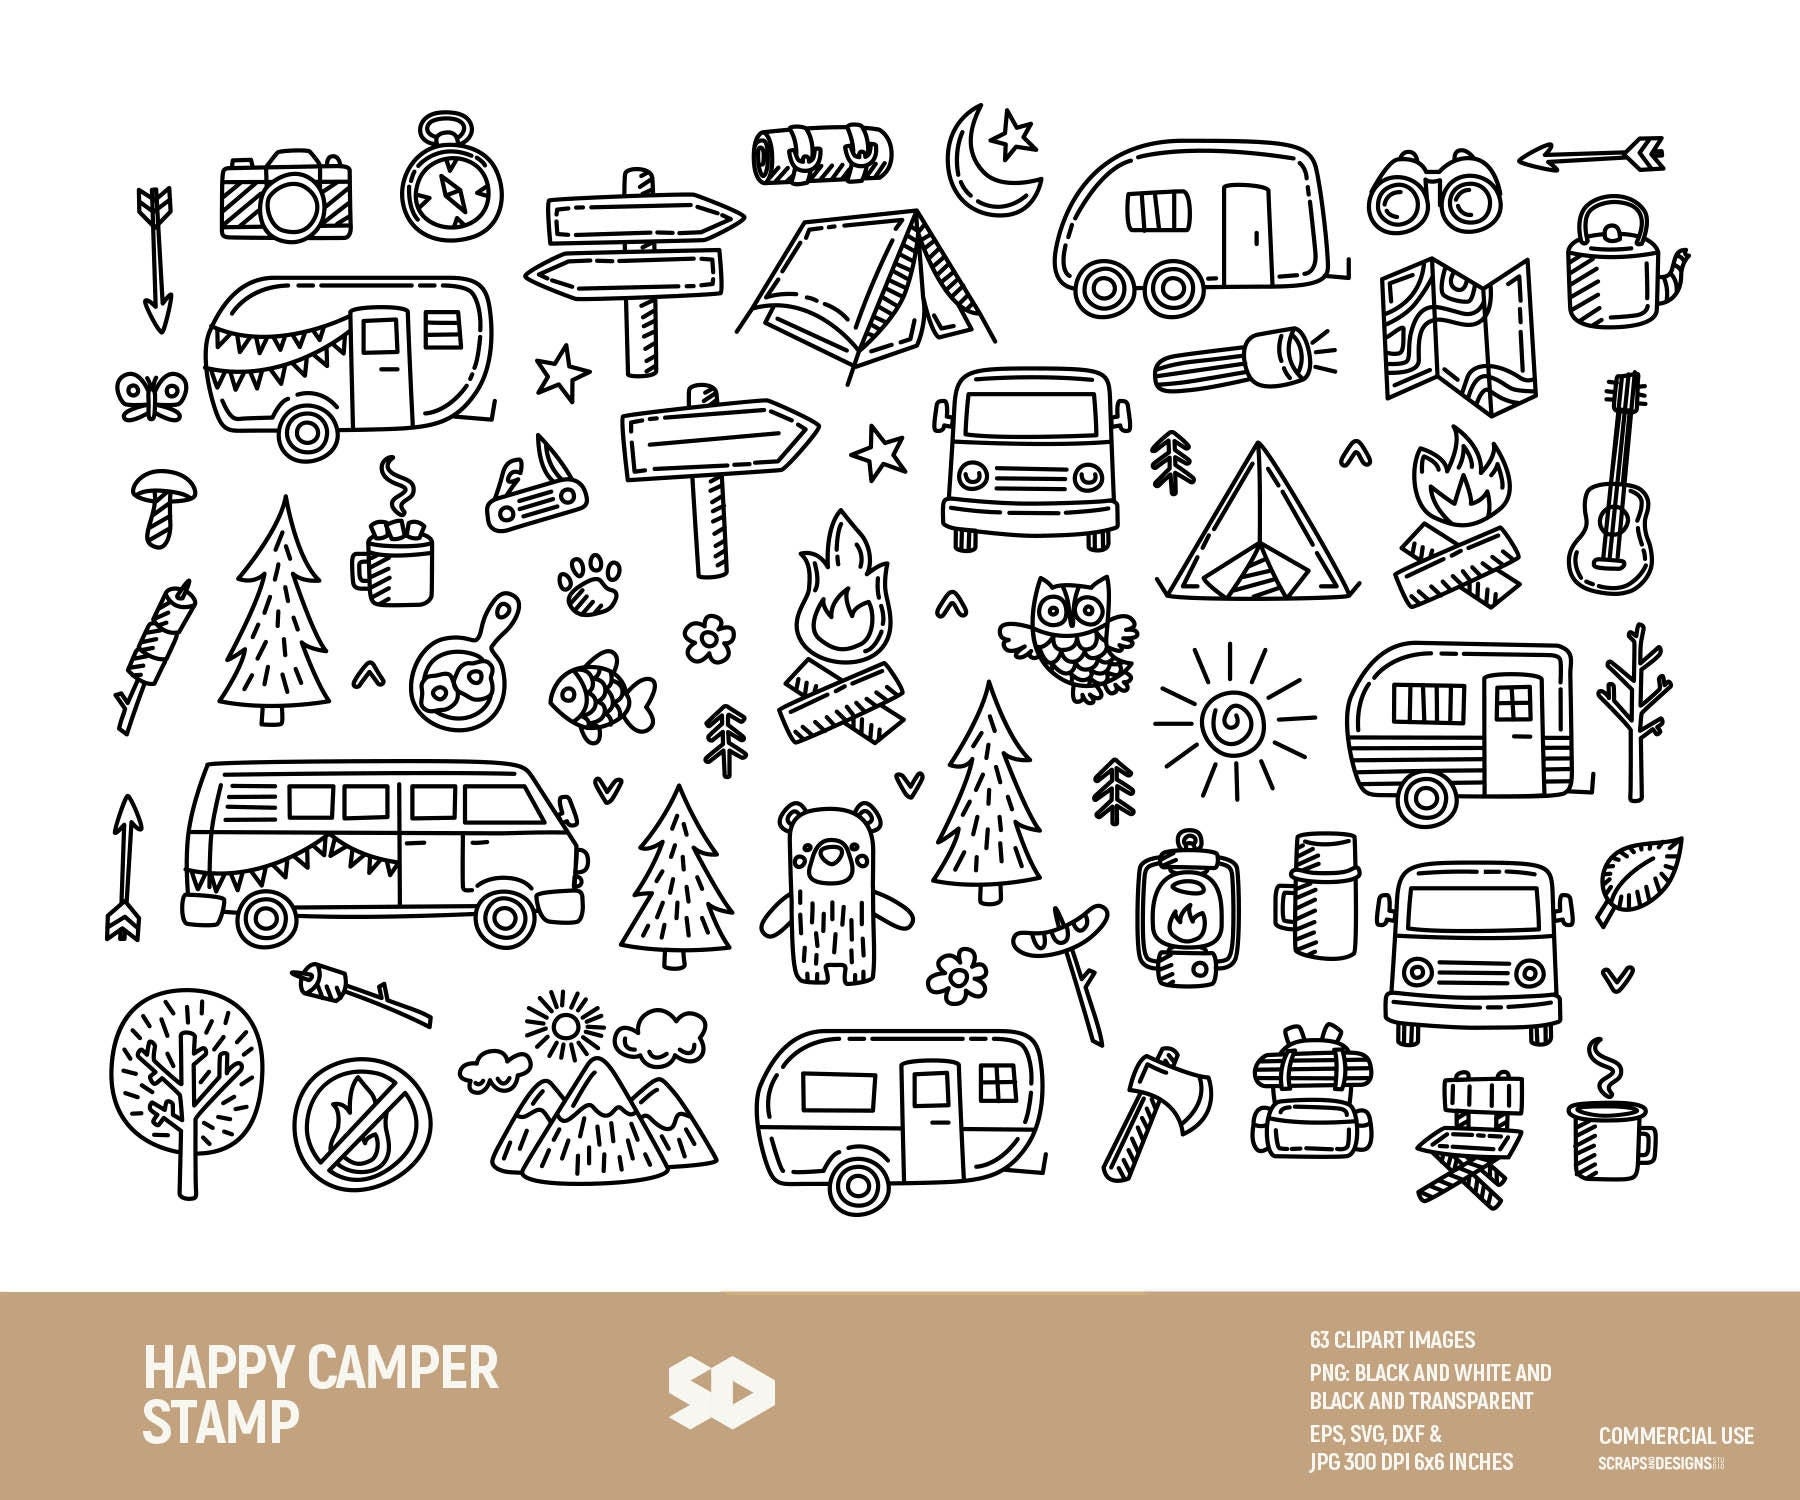 Happy camper clipart bundle, camping clip art, travel digital stamp, campfire draw, vector printable. Png Jpeg SVG DXF EPS. Commercial use.